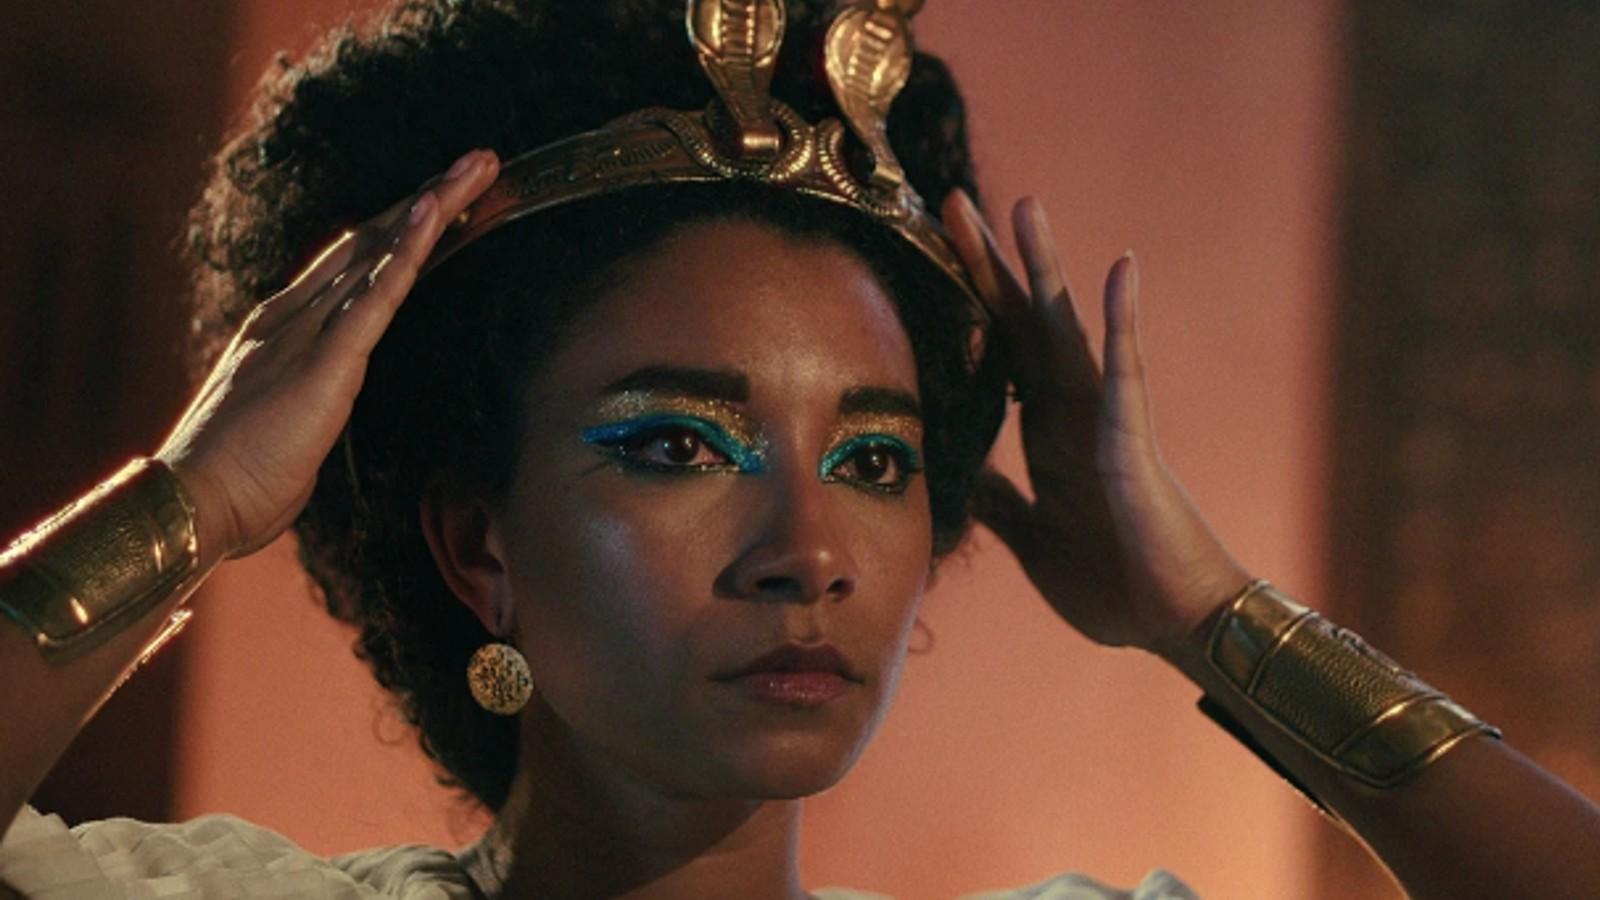 Adele James as Cleopatra wears a crown in Queen Cleopatra